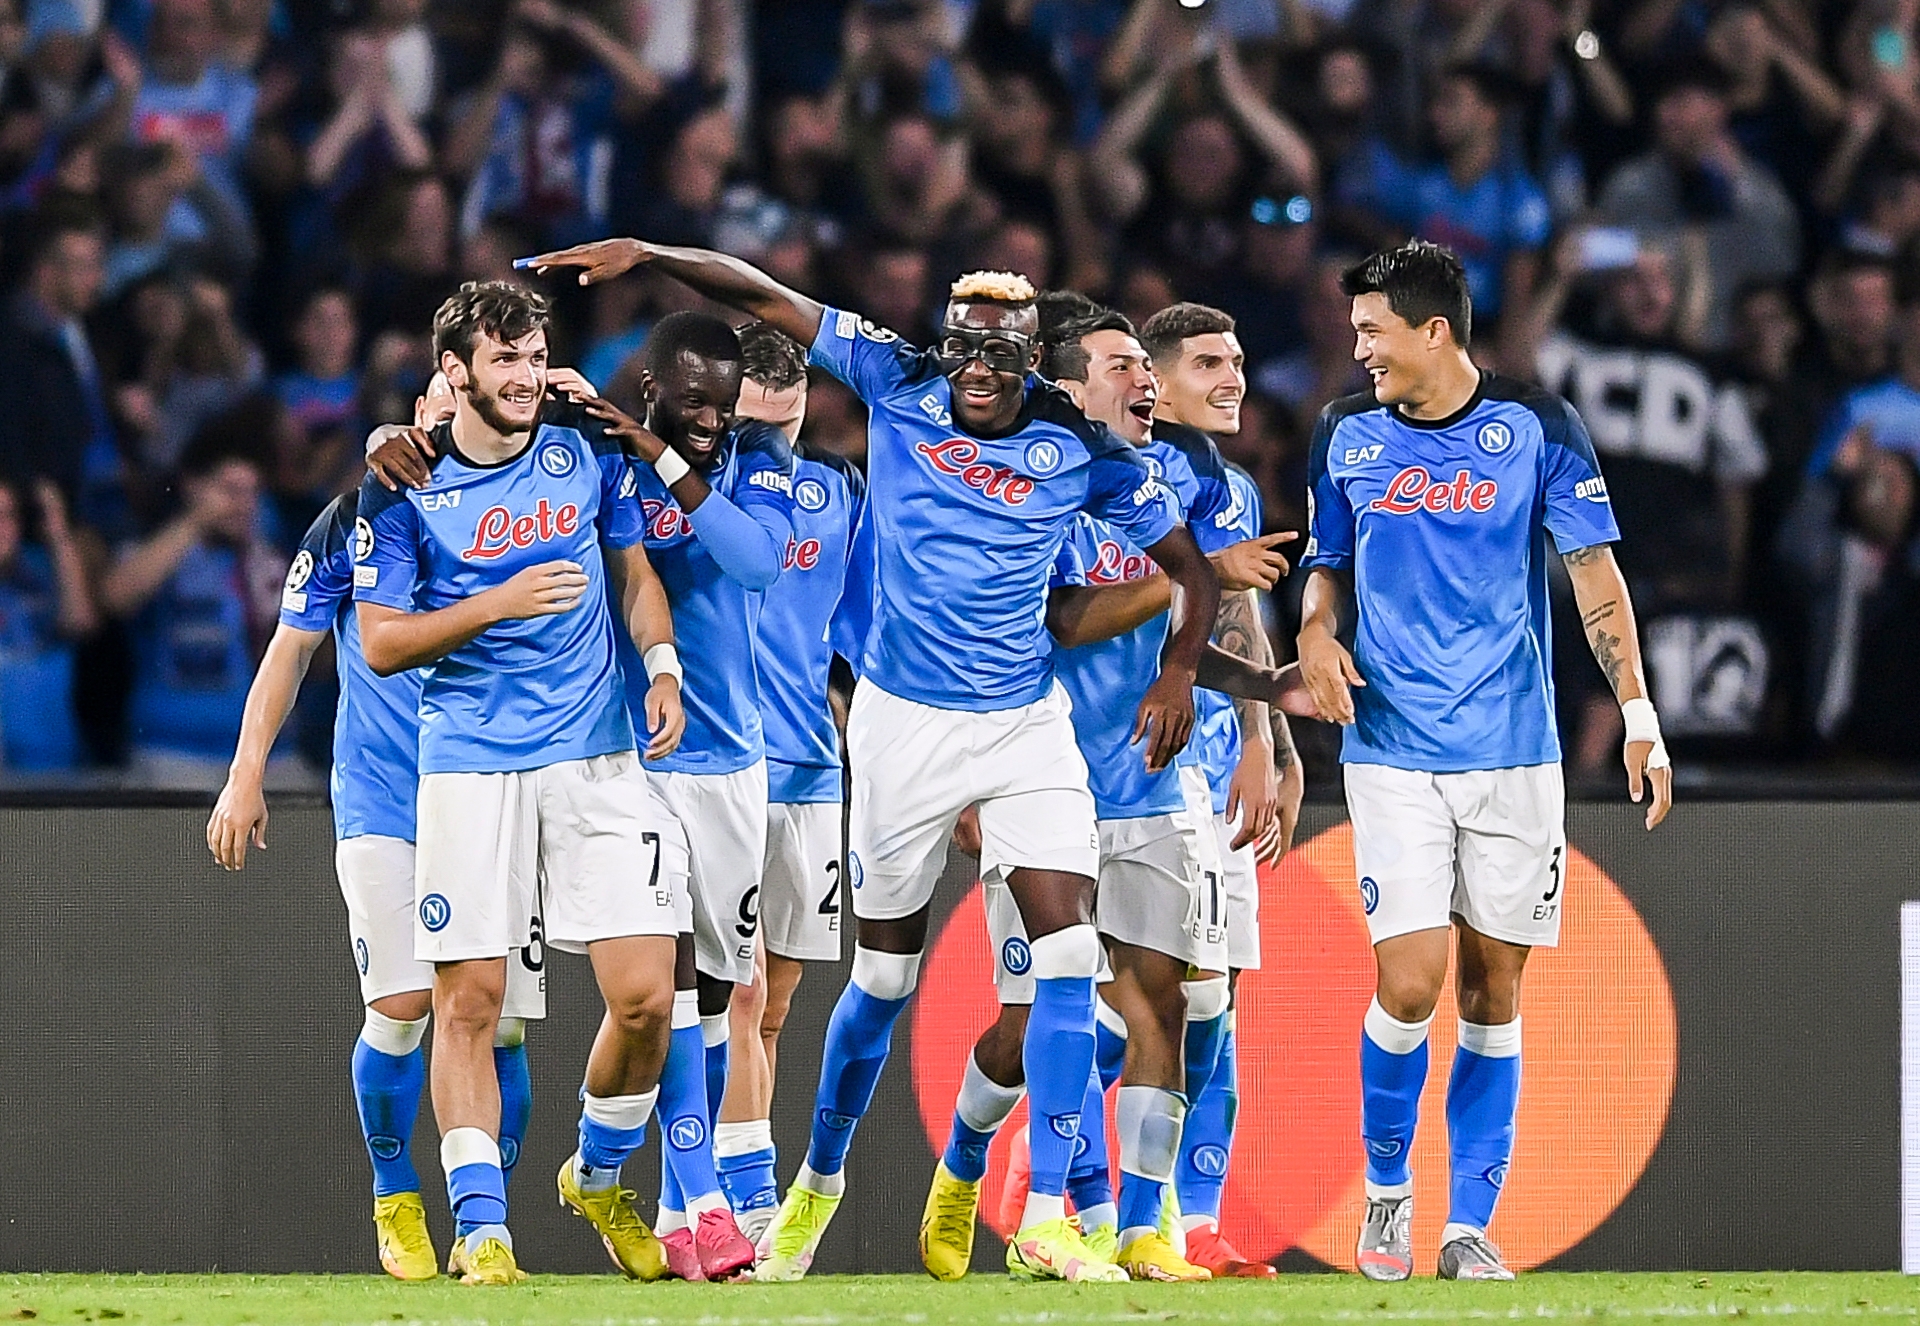 Napoli's amazing resurgence with Serie A leaders the highest scorers in Champions League and winning fans for their play